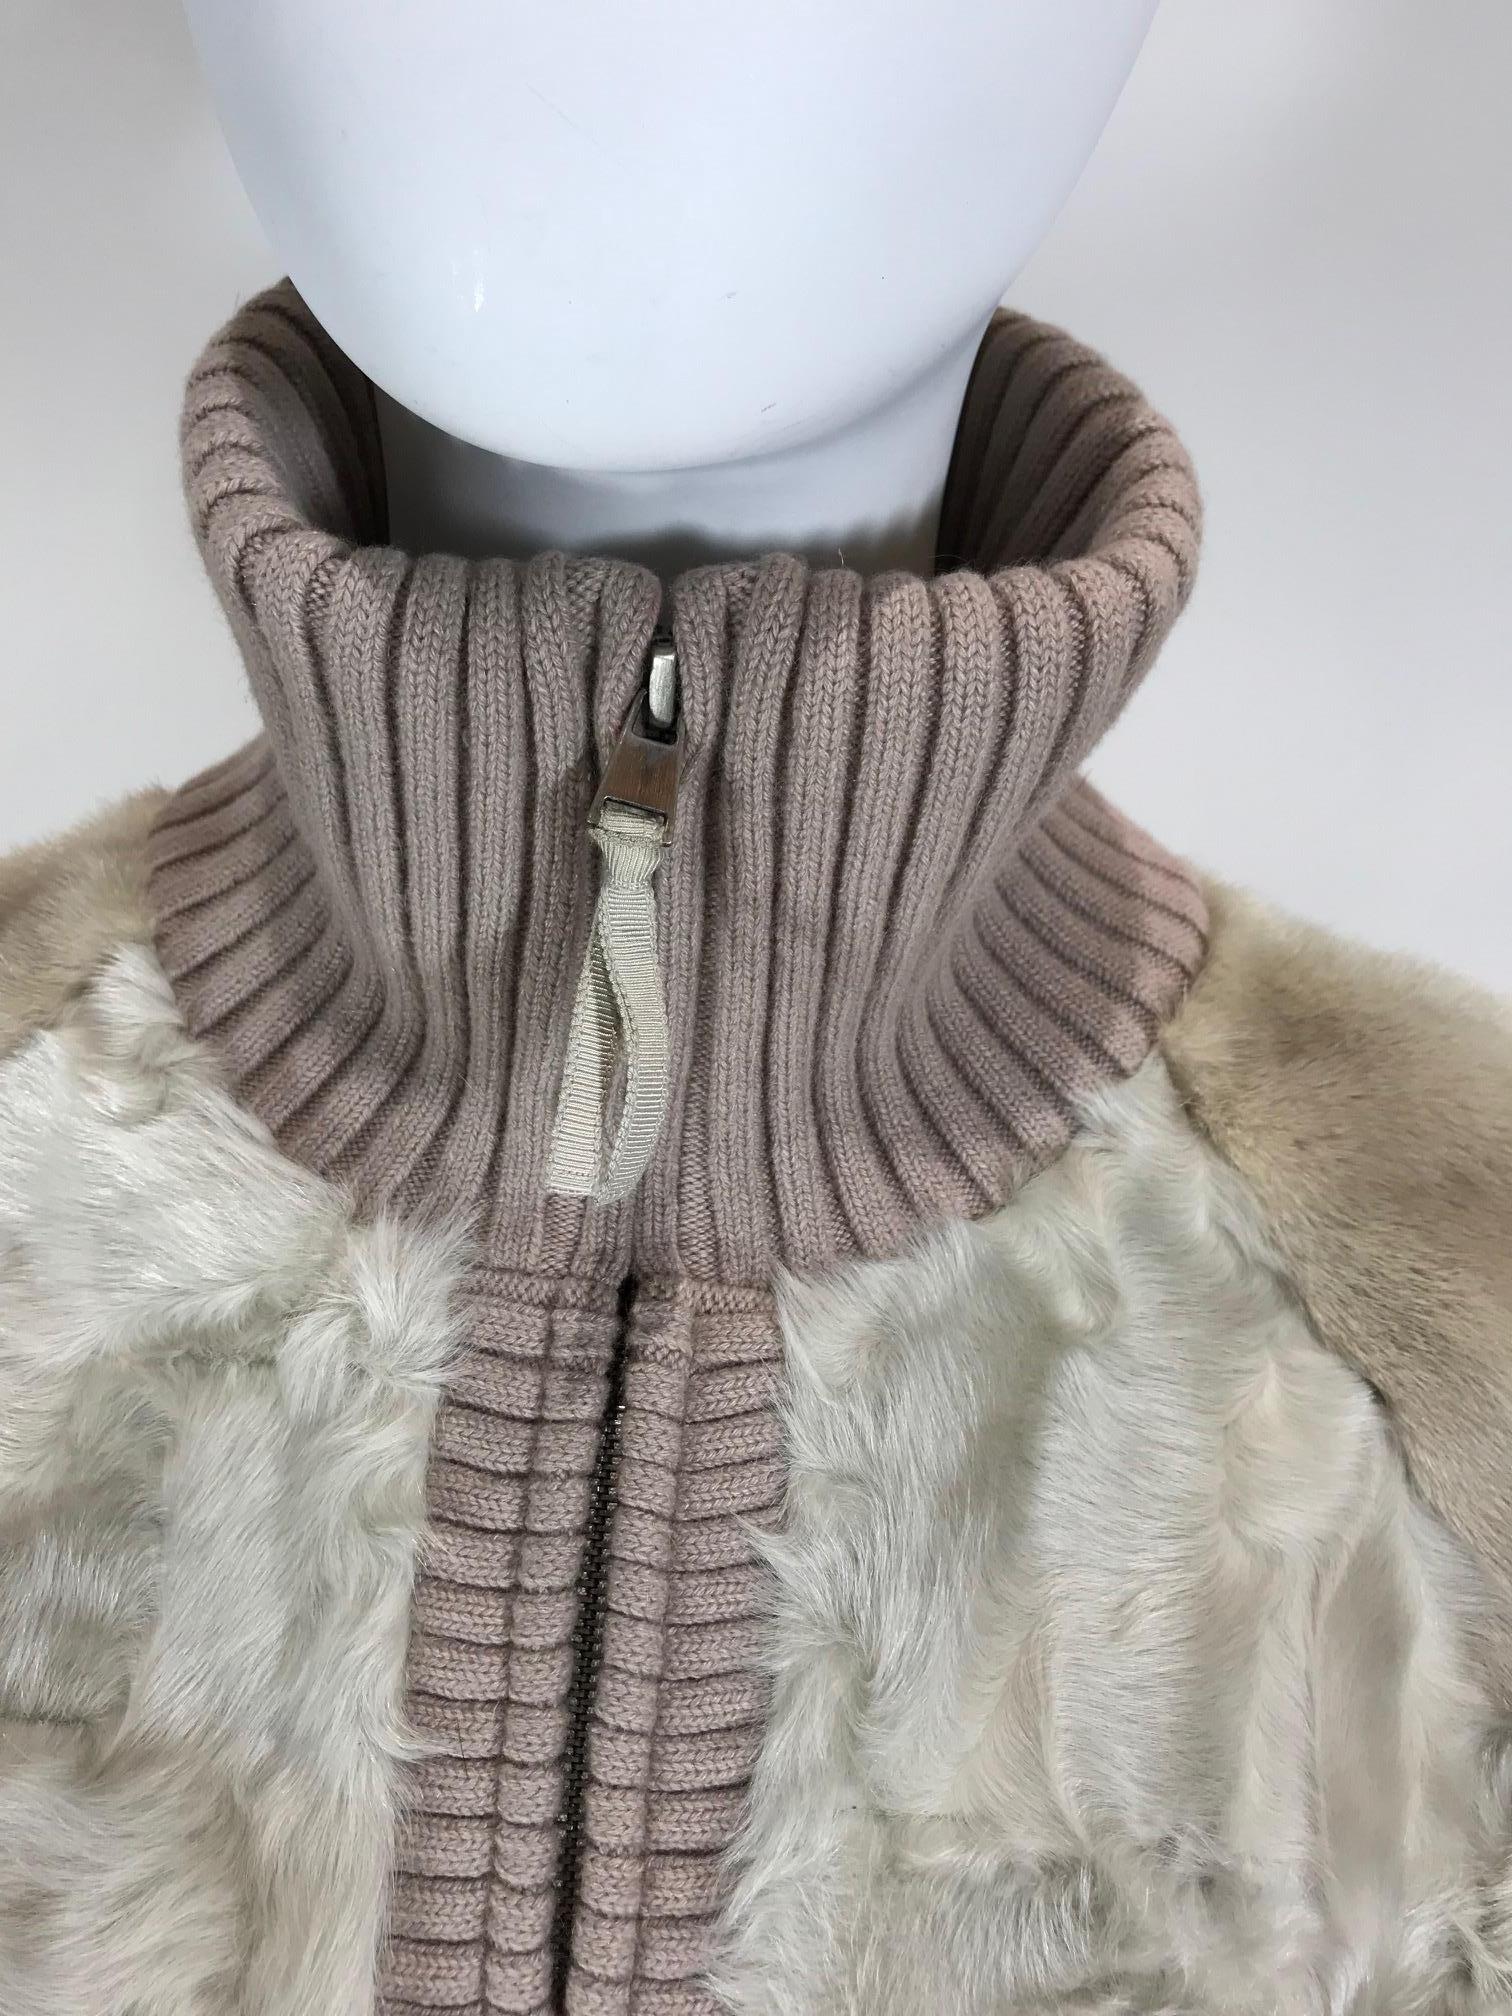 Creme and mauve persian lamb jacket. Zip closure at front. Rib knit trim. Mink fur sleeves. Dual pockets at hips. Size not listed, estimated from measurements. 